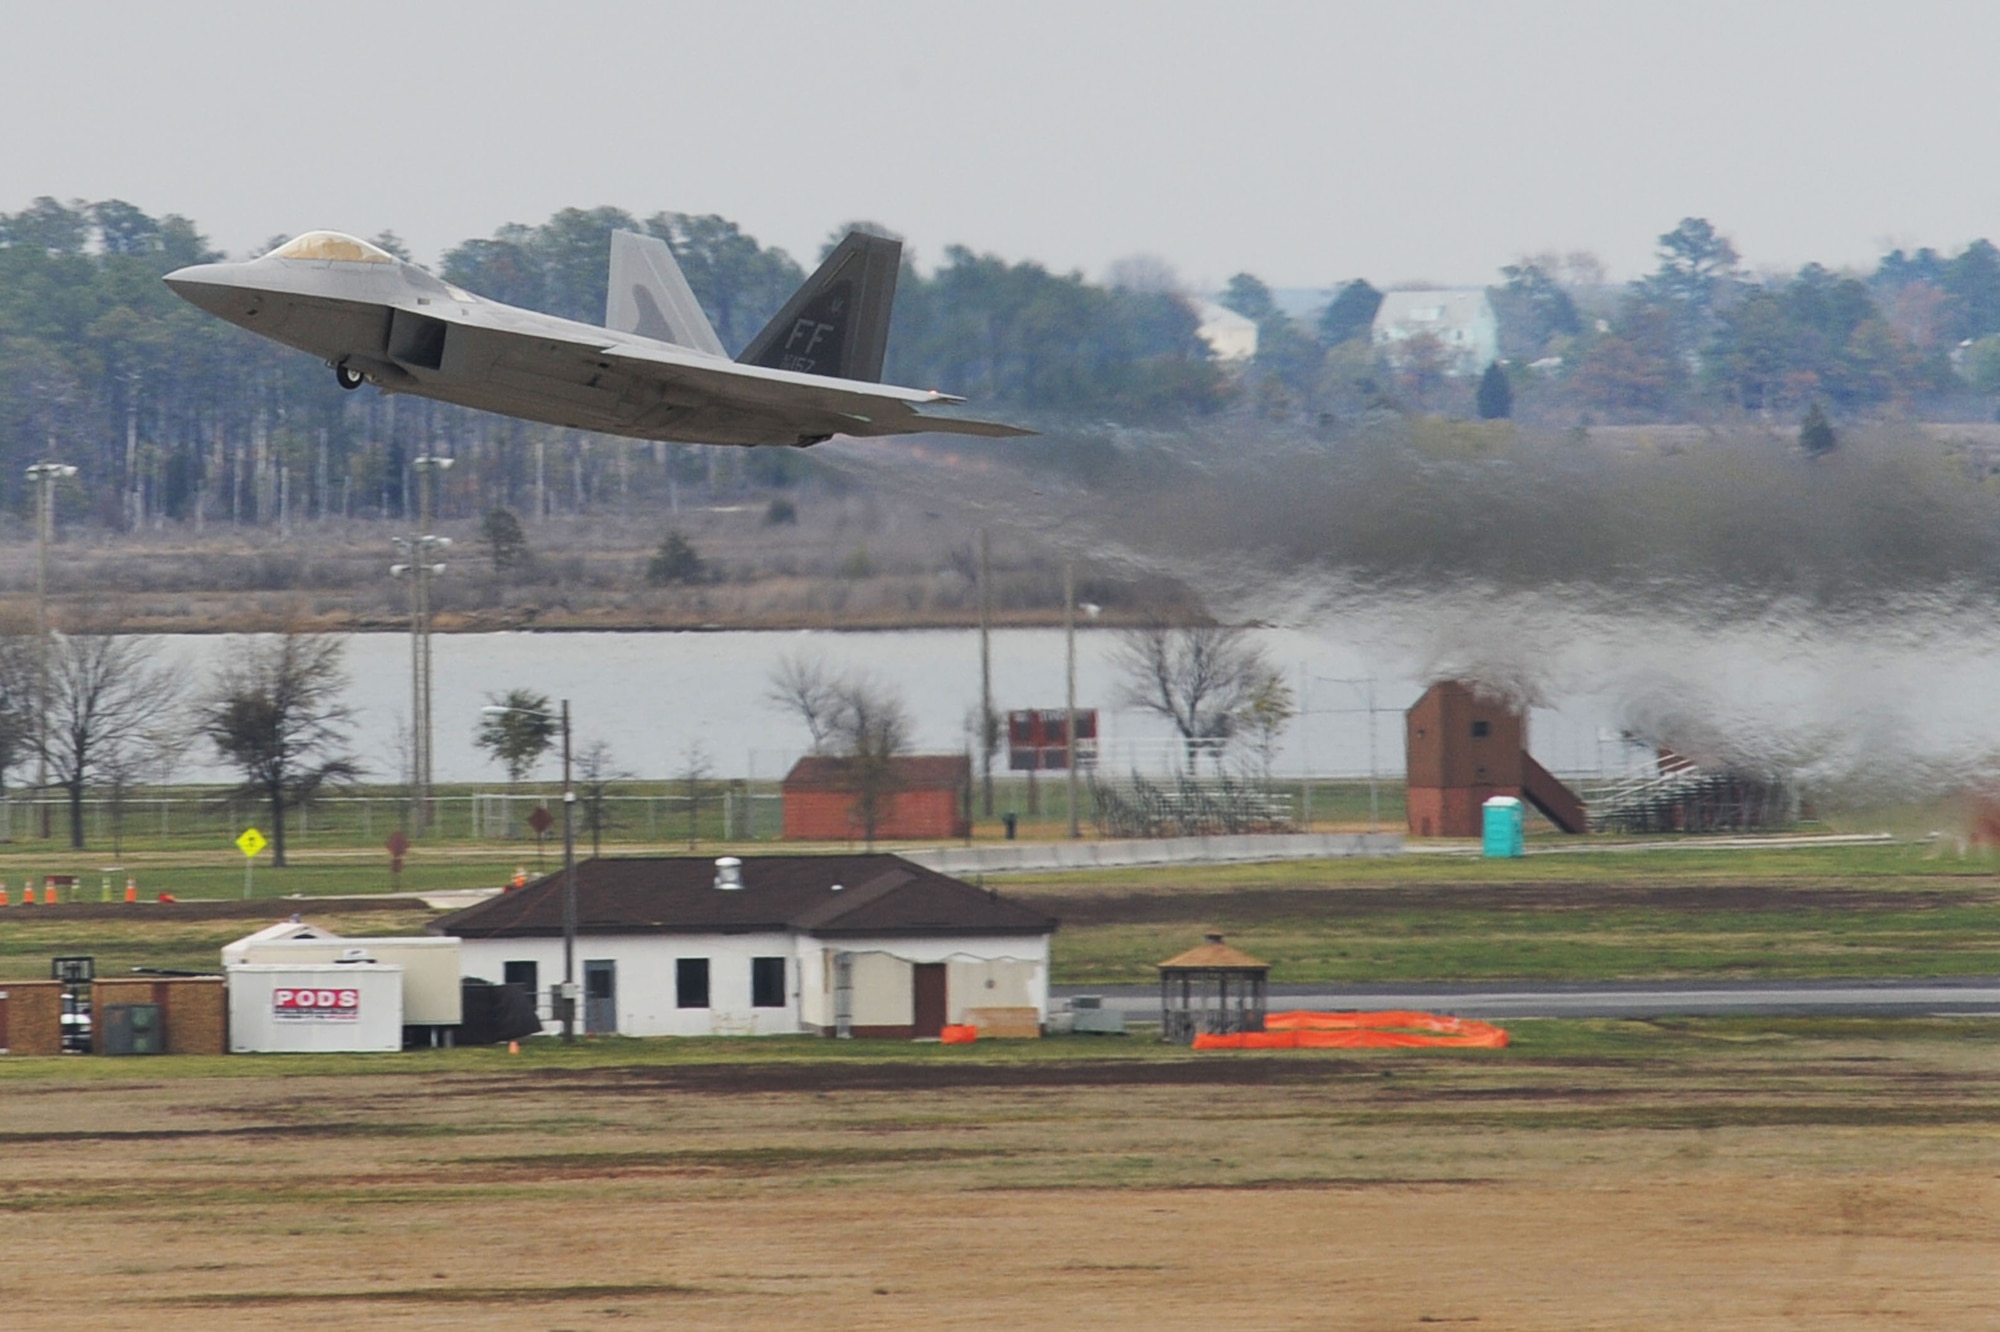 An F-22 Raptor takes off from Langley Air Force Base, Va., to escort a T-38 Talon, from Holloman AFB, N.M., April 1, 2011. The T-38 is on temporary assignment to support combat readiness training for the 1st FW pilots. (U.S. Air Force photo by Senior Airman Brian Ybarbo/Released)
   